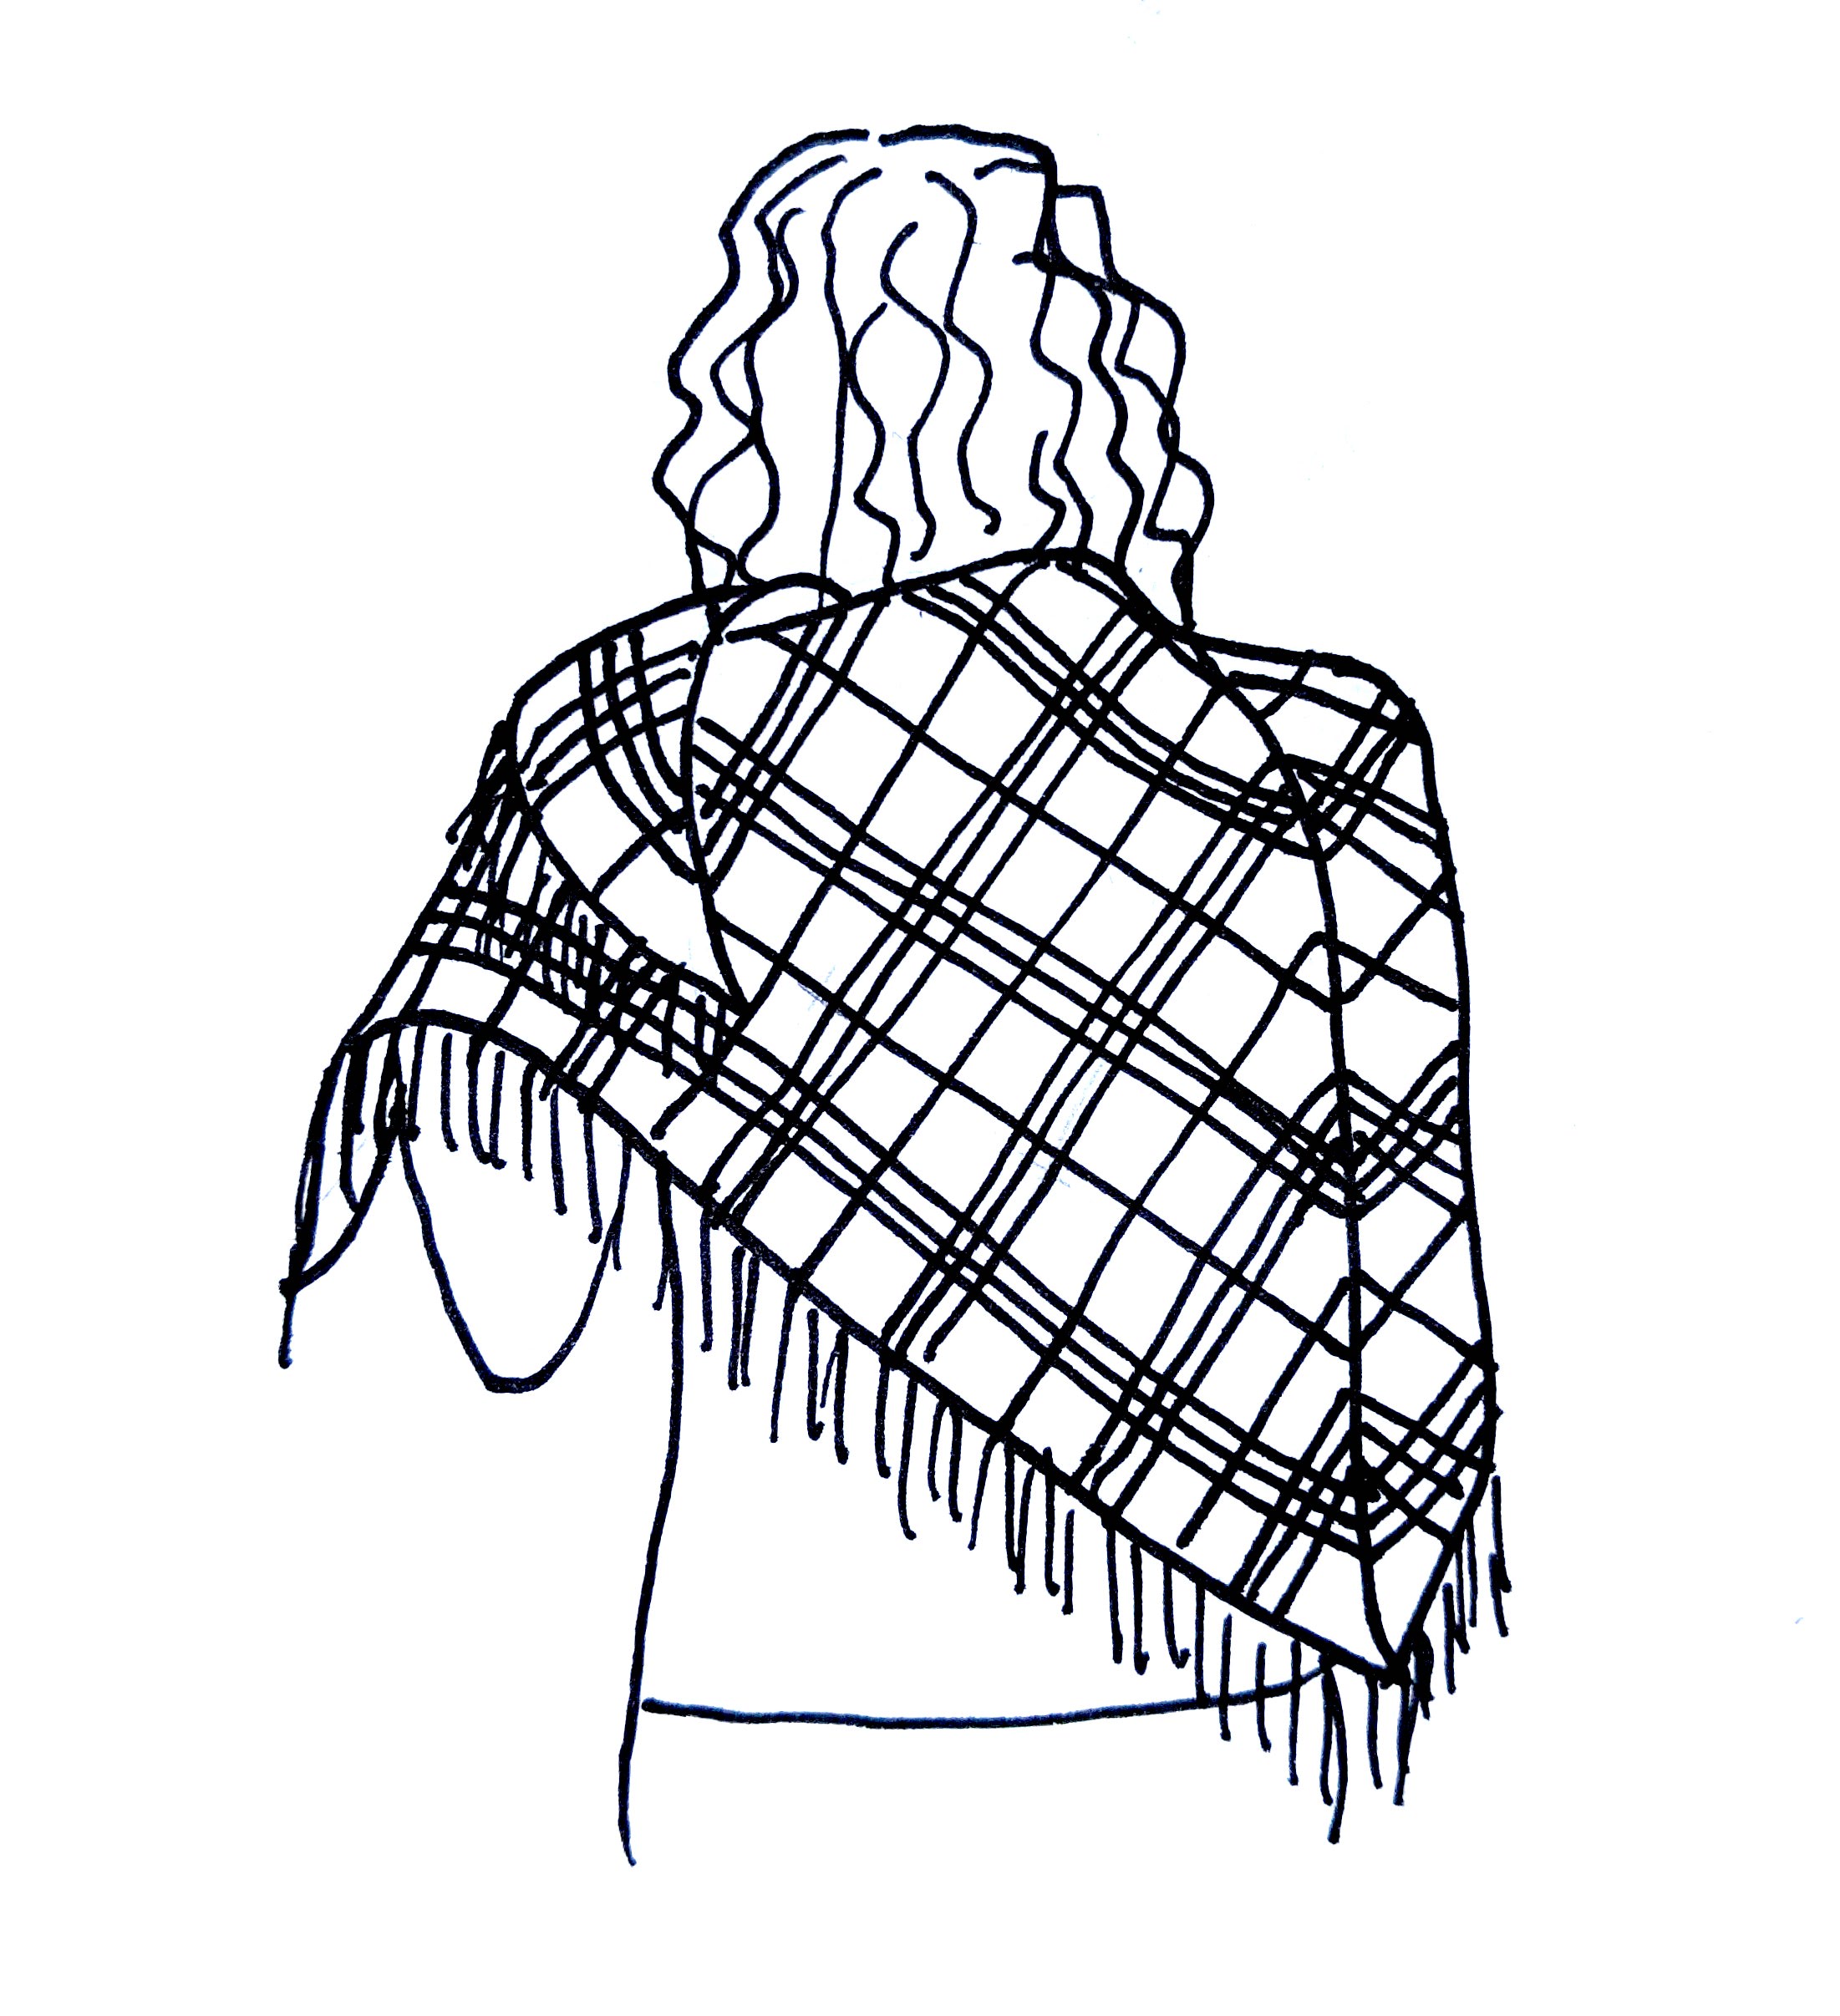 A black and white sketch of the head and torso of a person from behind, with a plaid shawl with fringe draped around their back and shoulders.